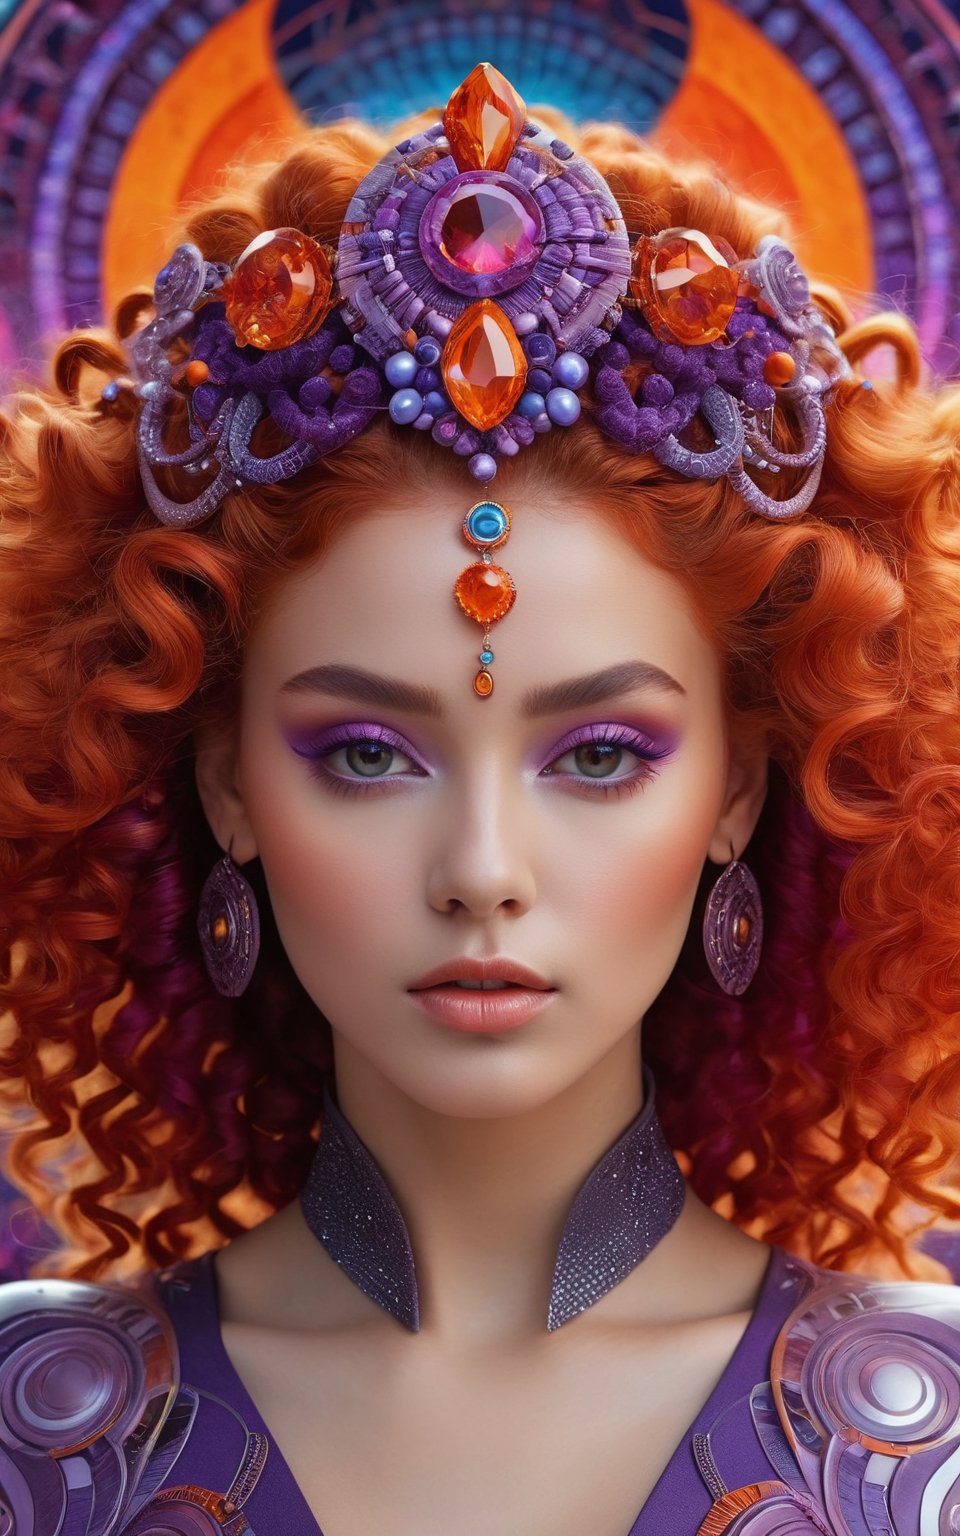 (best quality,8K,highres,masterpiece), ultra-detailed, (portrait of a woman with intricate, vibrant hair and a futuristic, ethereal style), portrayal of a woman with mesmerizing, colorful curls in shades of orange, red, and purple. She wears a headpiece with a glowing central gem. The background is an intricate pattern of swirling designs, emphasizing a futuristic and surreal aesthetic. The woman's expression is serene and captivating, with detailed facial features and a focus on her striking hair and adornments.